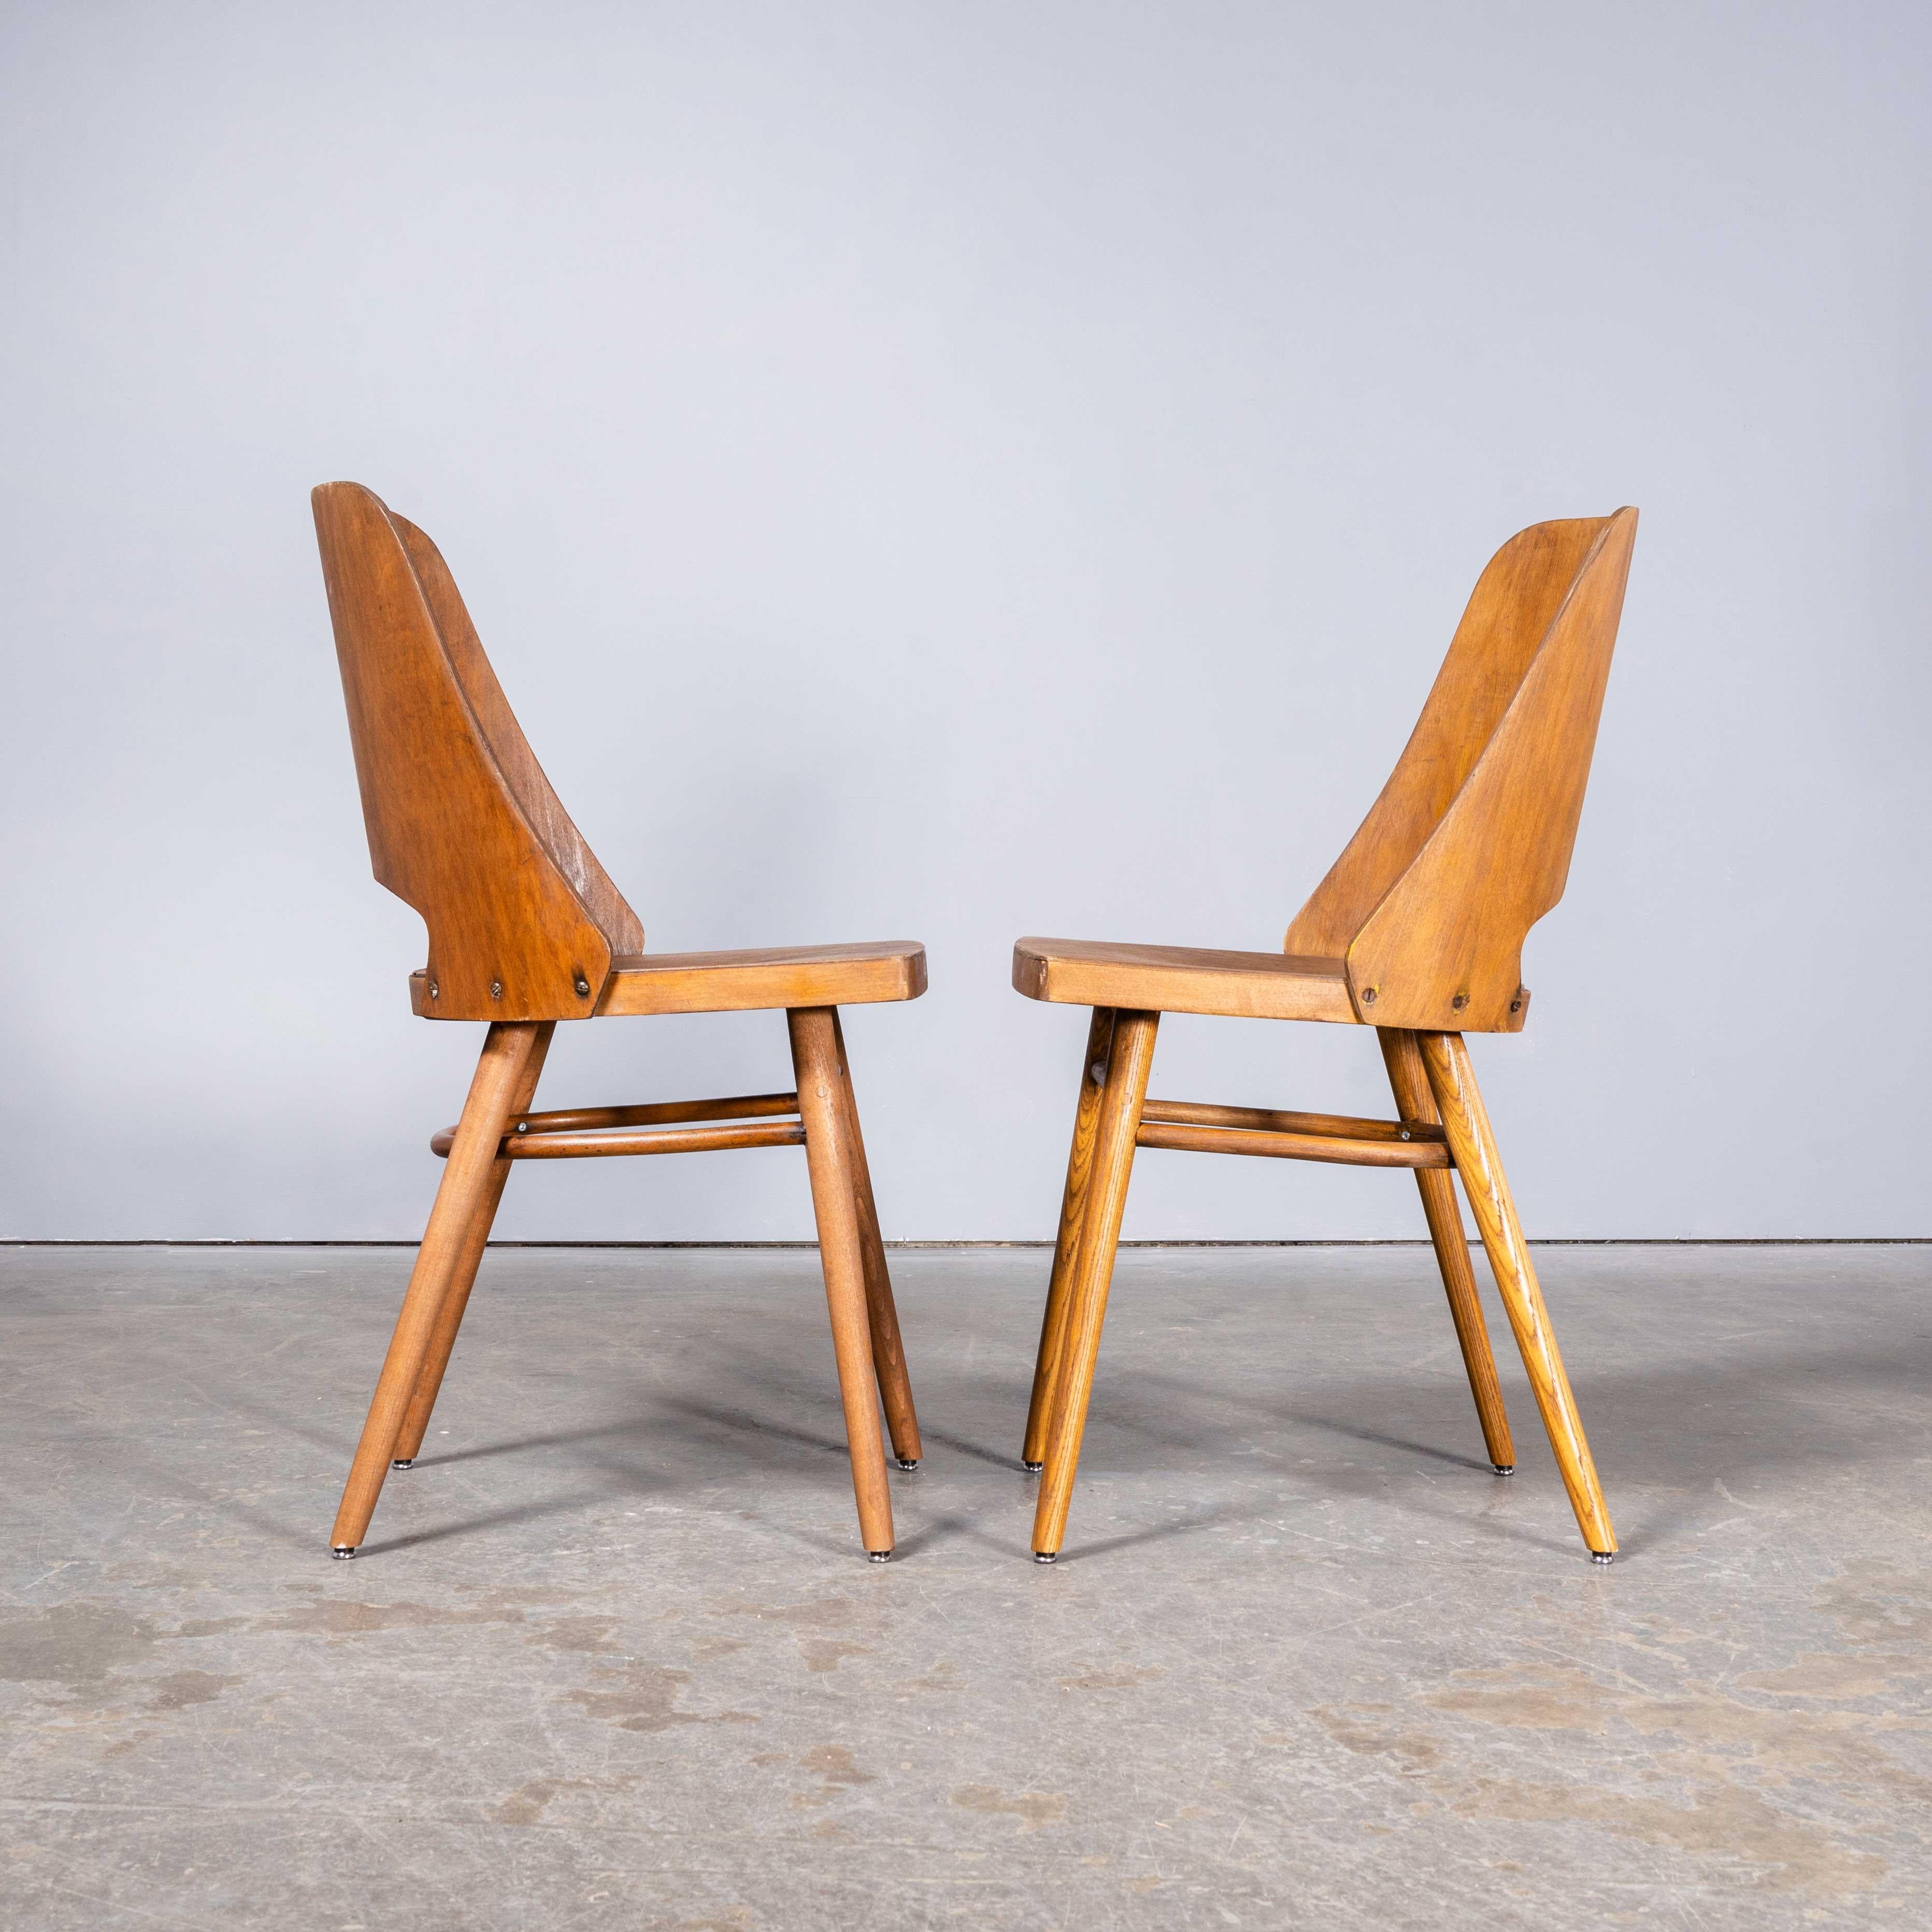 Czech 1950’s Mid Oak Dining Chairs By Radomir Hoffman For Ton – Pair For Sale